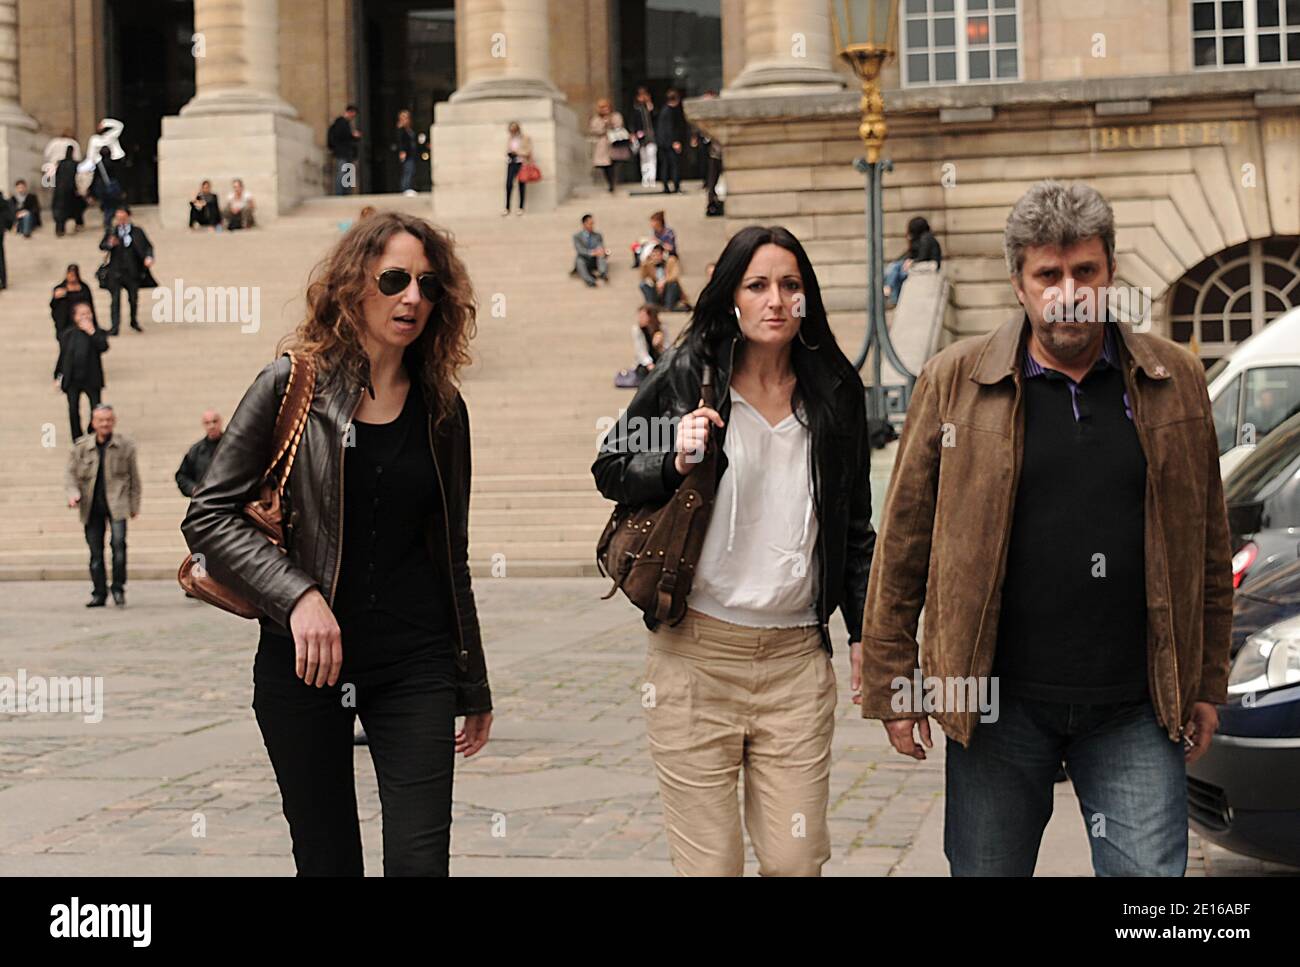 Stephanie Colonna, wife of Yvan Colonna leaves Paris court hall in Paris, France on May 2, 2011 after the opening of Yvan Colonna's appeal trial for the murder in 1998 of Claude Erignac, France's top state official on the Mediterranean island of Corsica. Photo by Giancarlo Gorassini/ABACAPRESS.COM Stock Photo